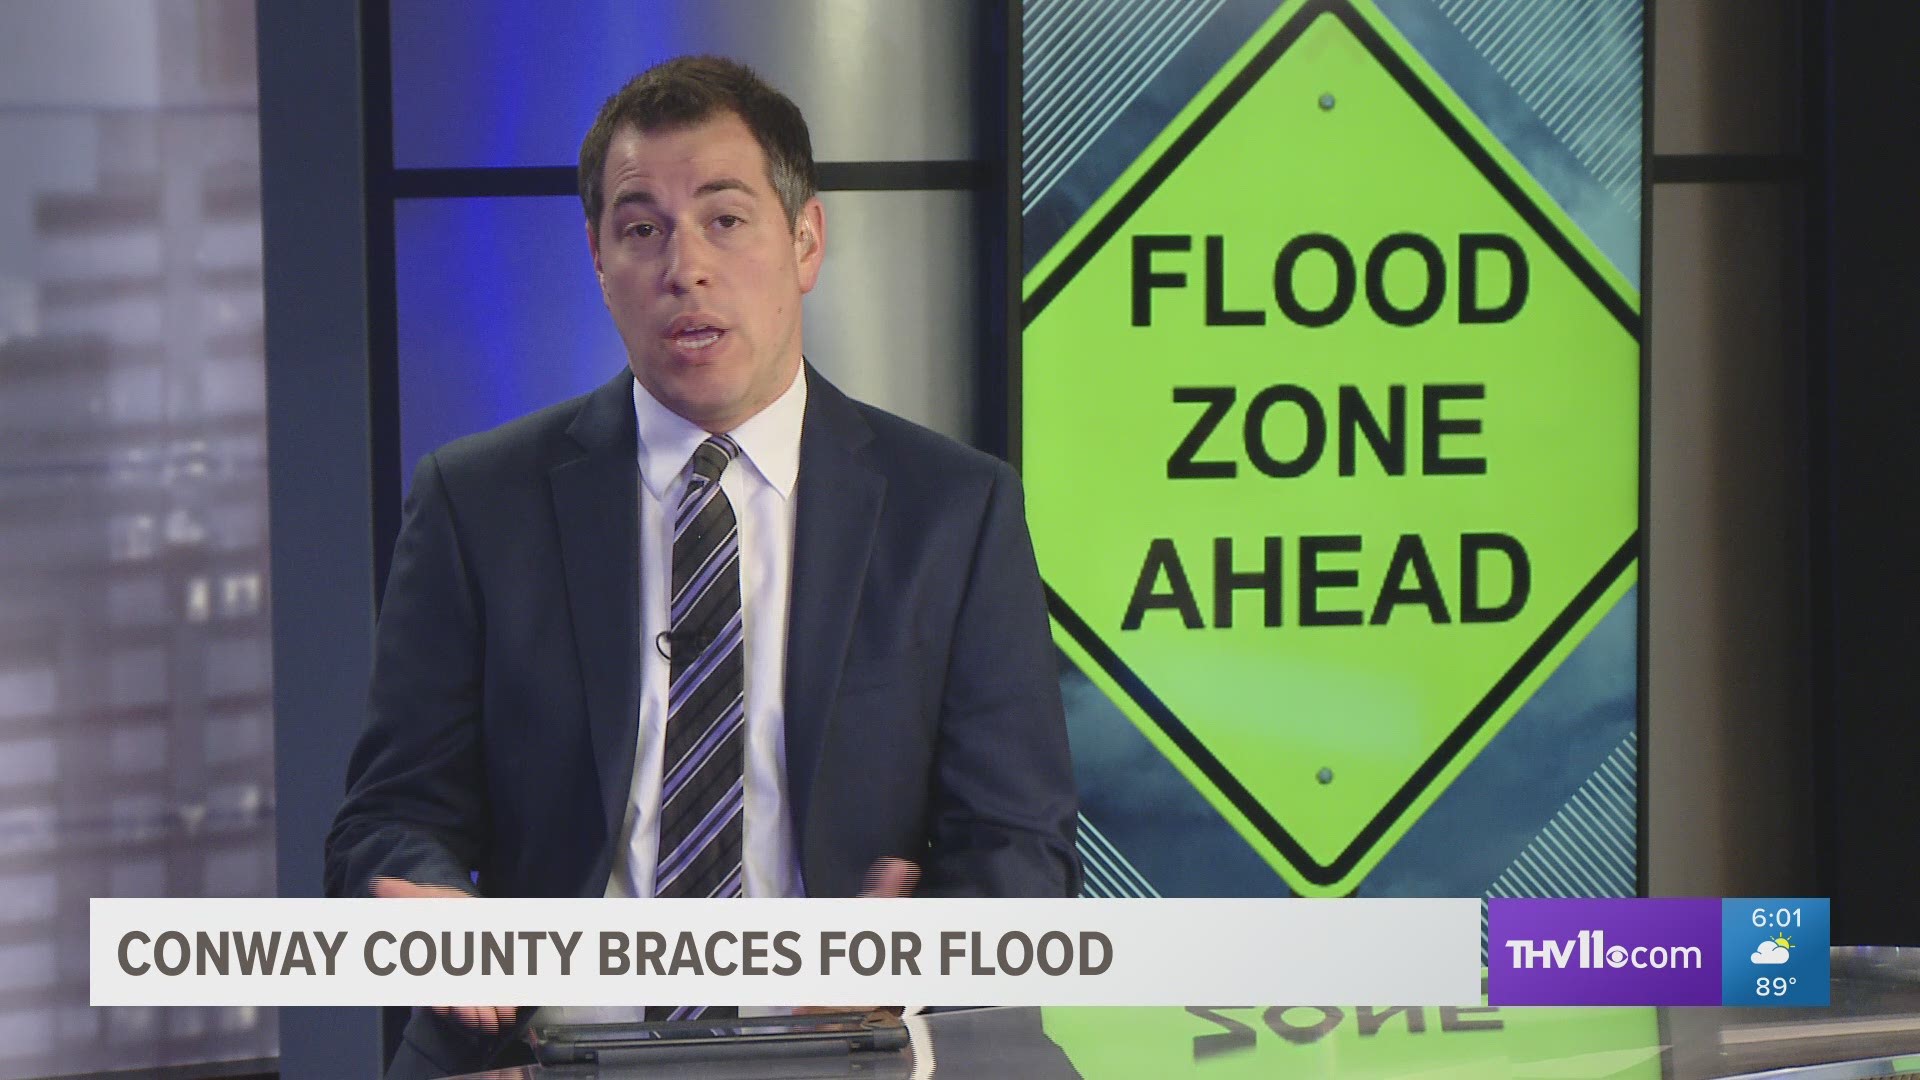 Conway County is one of the areas expected to be hit hardest by the flooding.